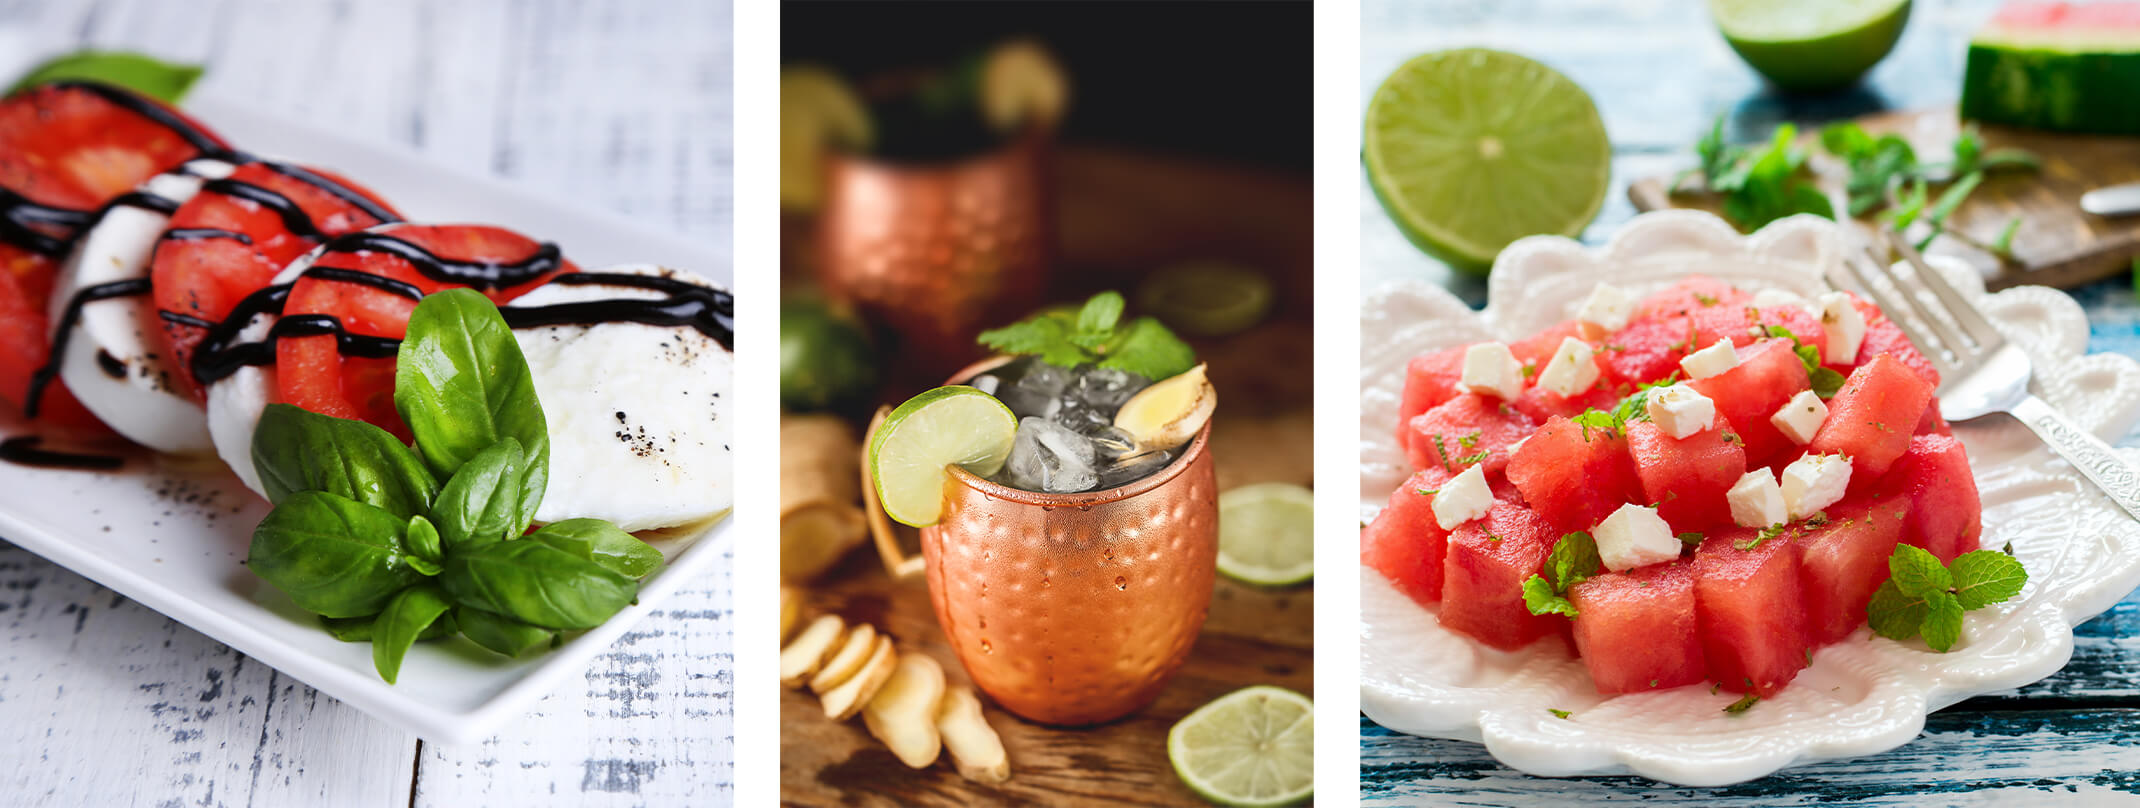 3 images: caprese salad, ginger grape mule, and watermelon, feta and mint salad